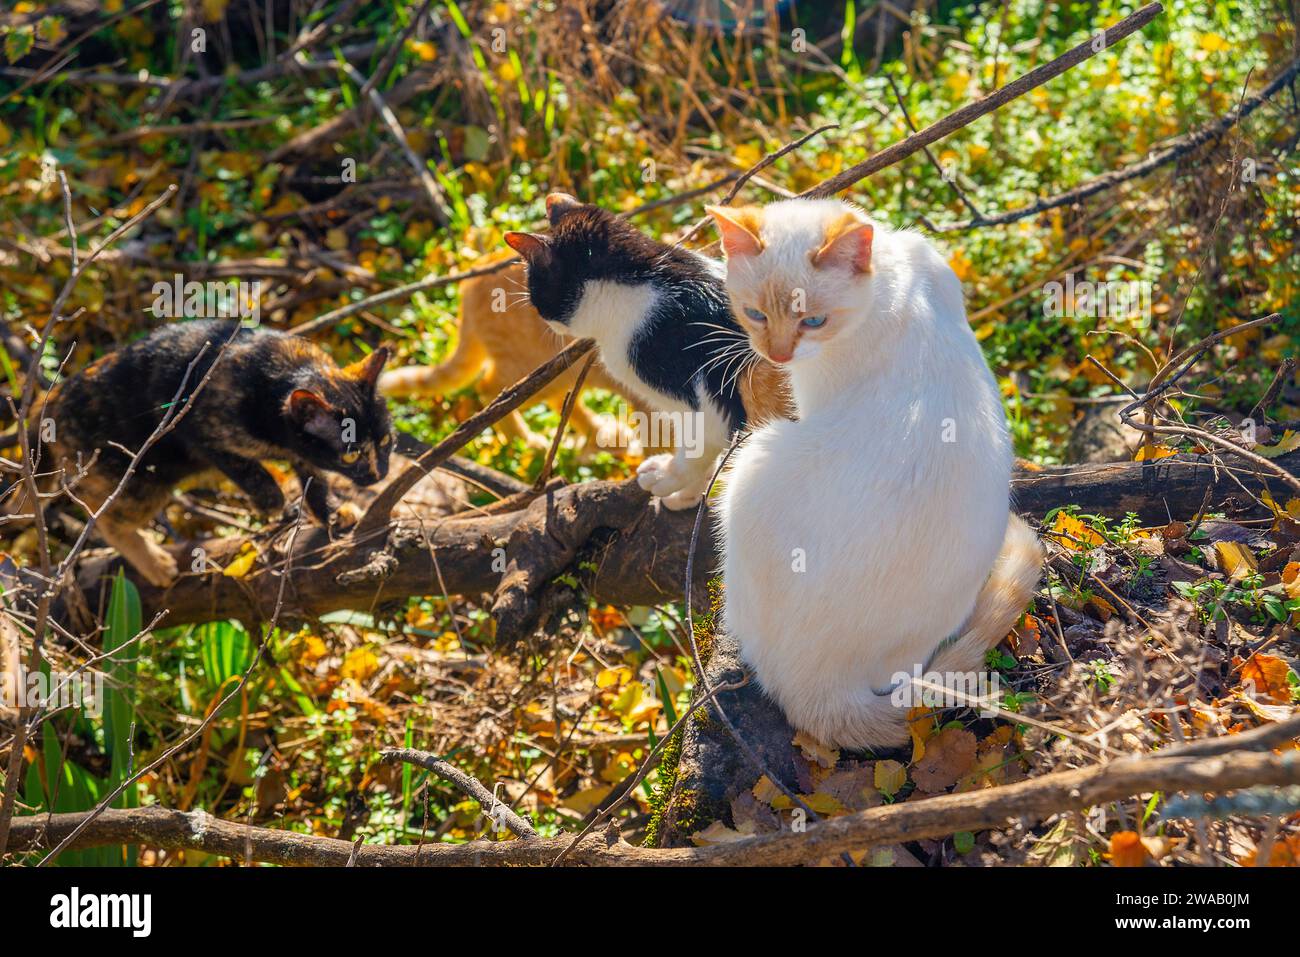 Cats in nature. Stock Photo